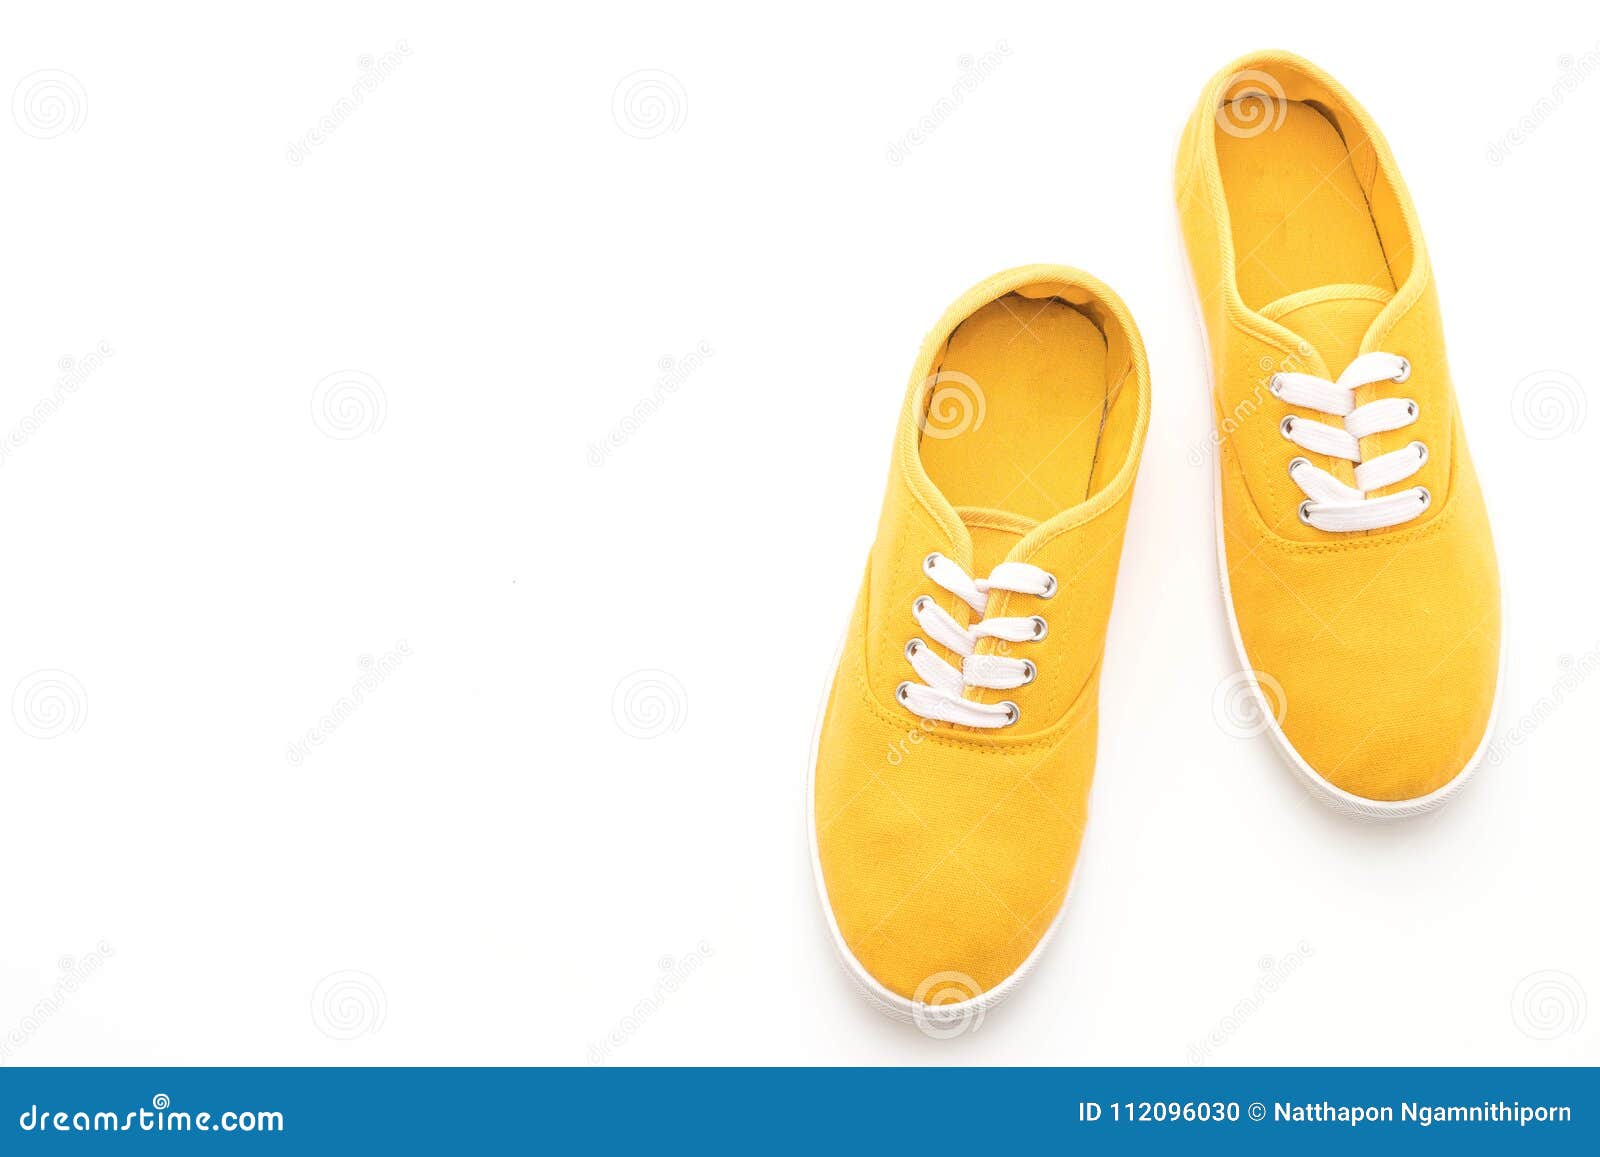 Yellow Sneakers on White Background Stock Photo - Image of walking ...